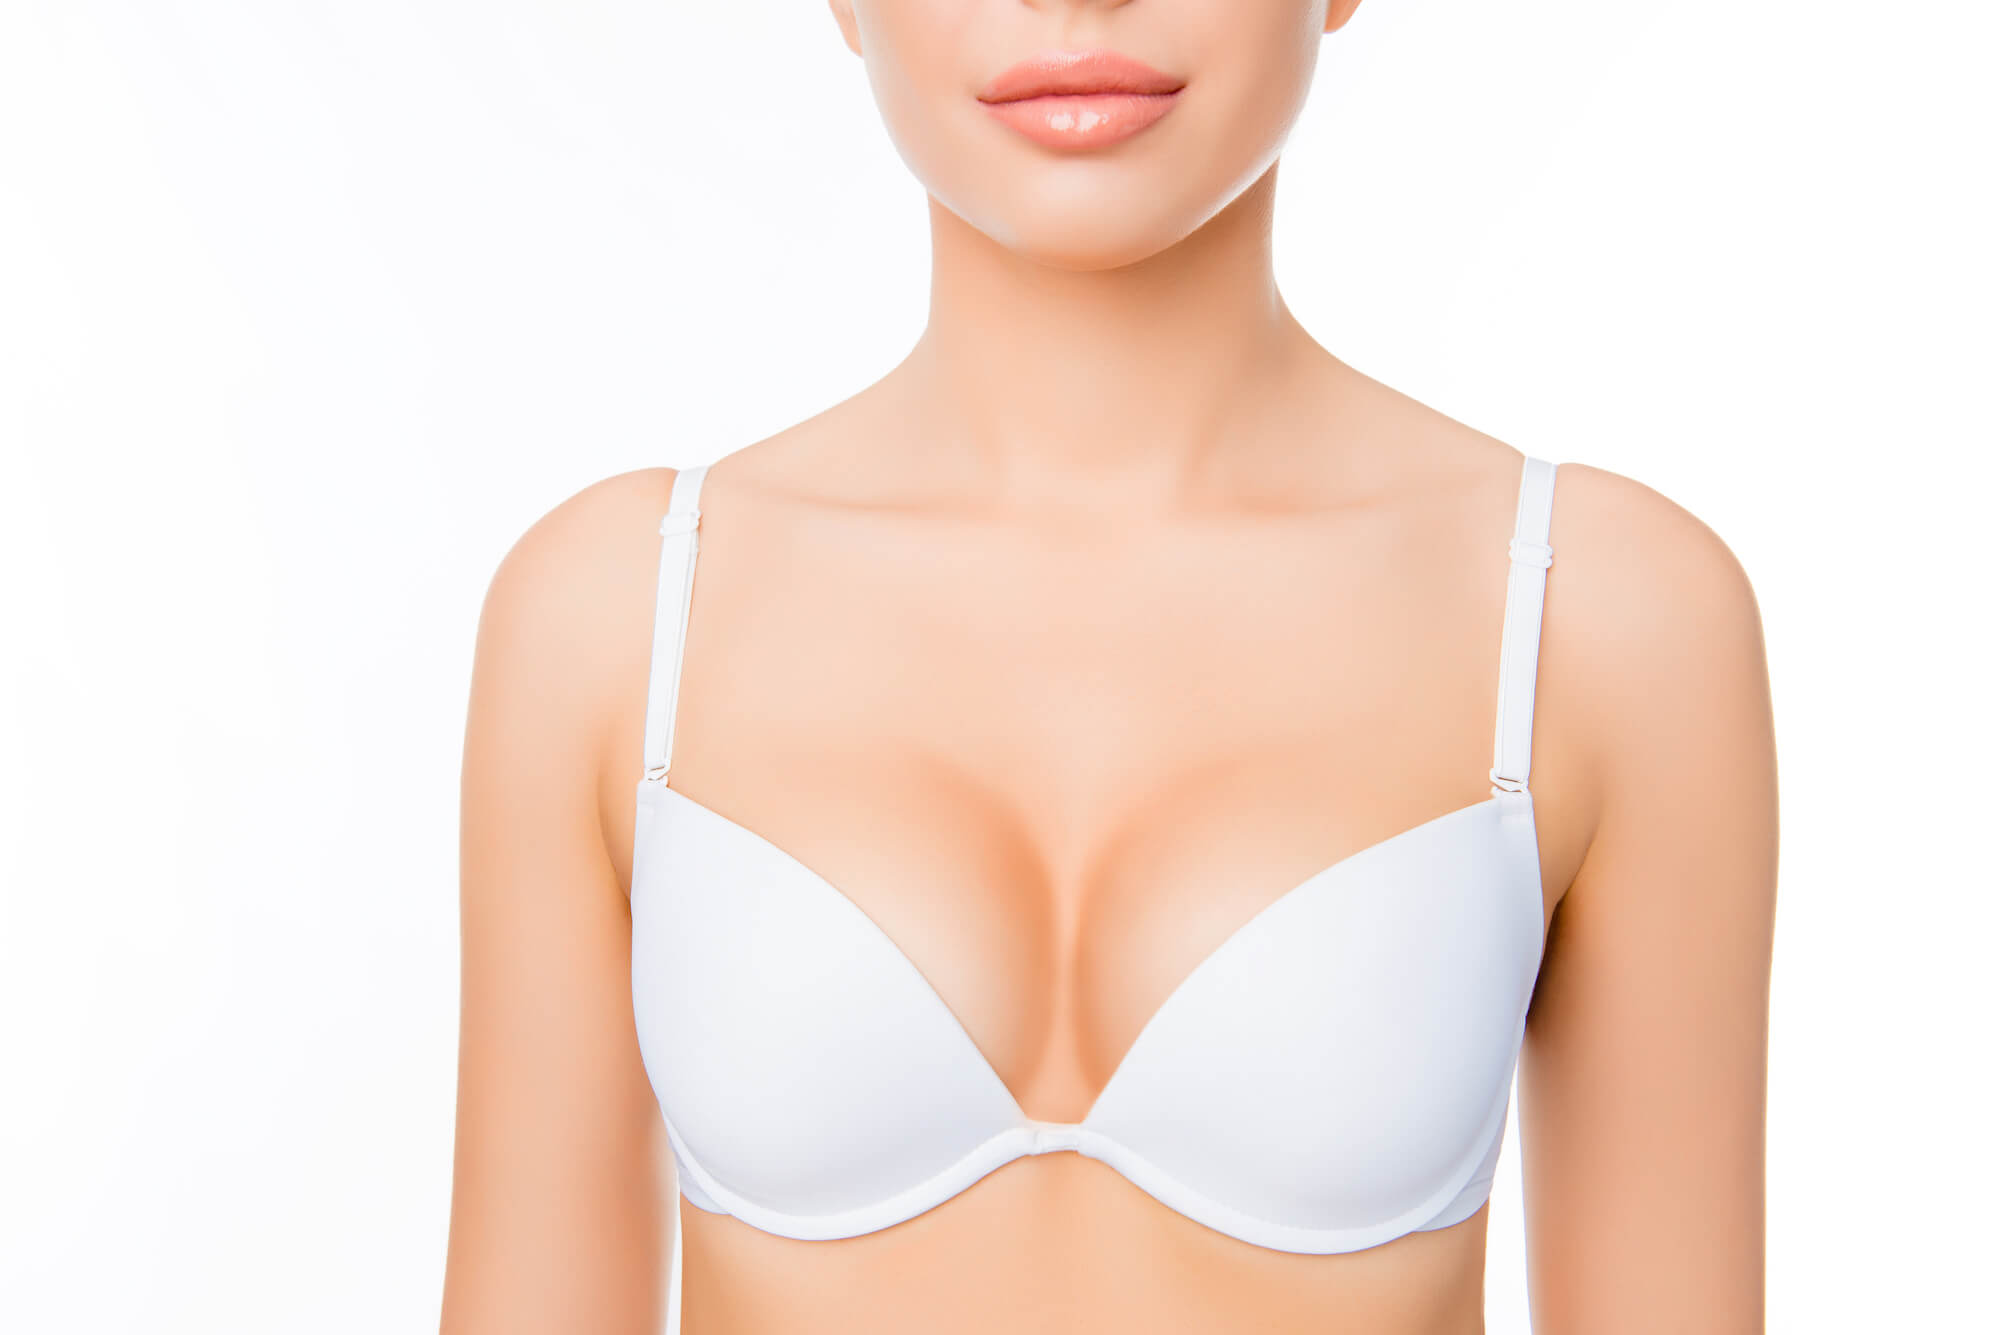 Woman With Smaller Breasts in Bra